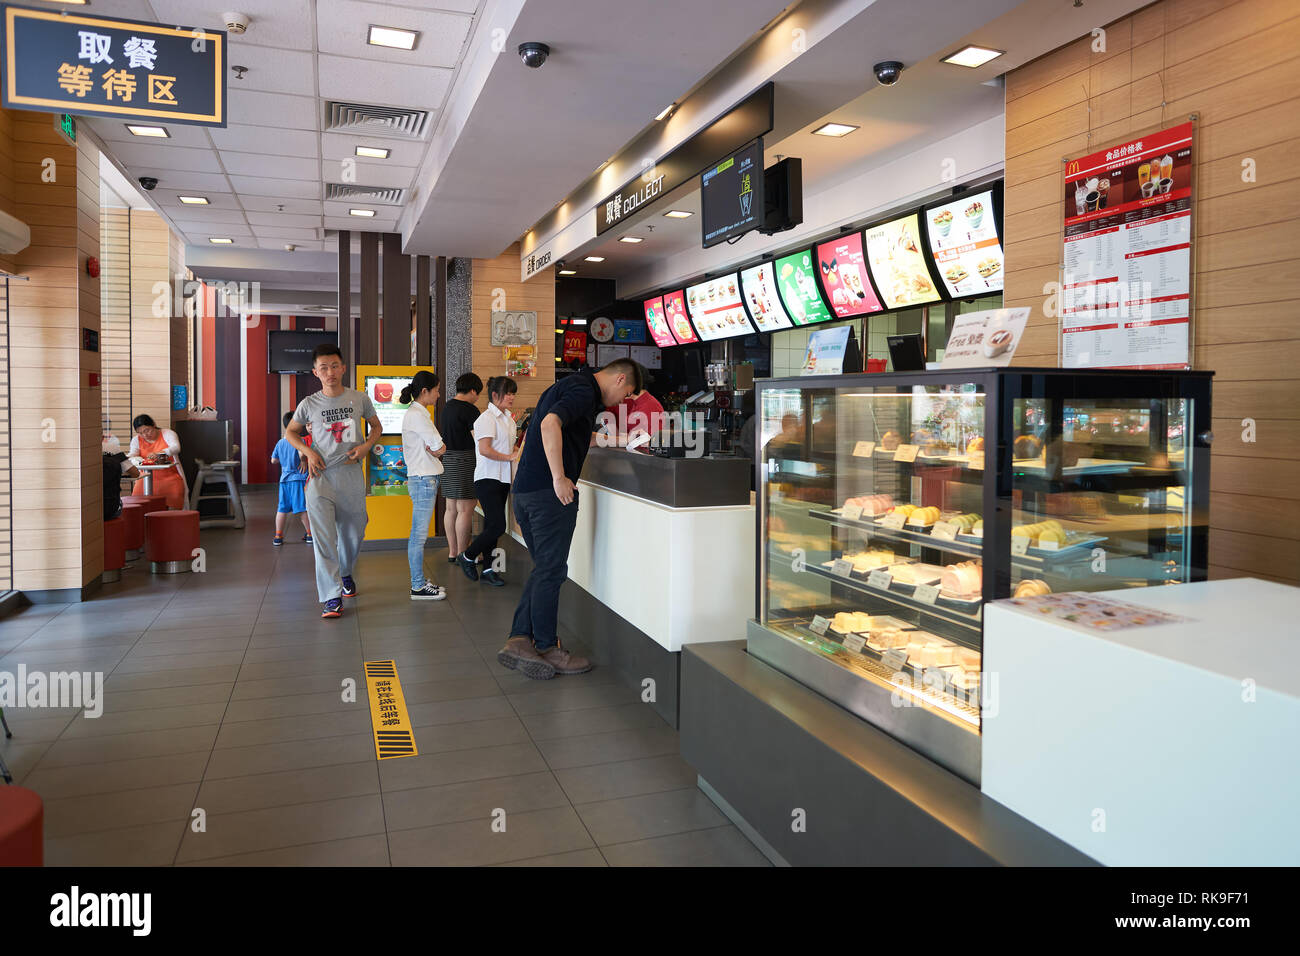 Shenzhen China May 06 2016 Inside Of Mcdonald S Restaurant Mcdonald S Is The World S Largest Chain Of Hamburger Fast Food Restaurants Founded I Stock Photo Alamy